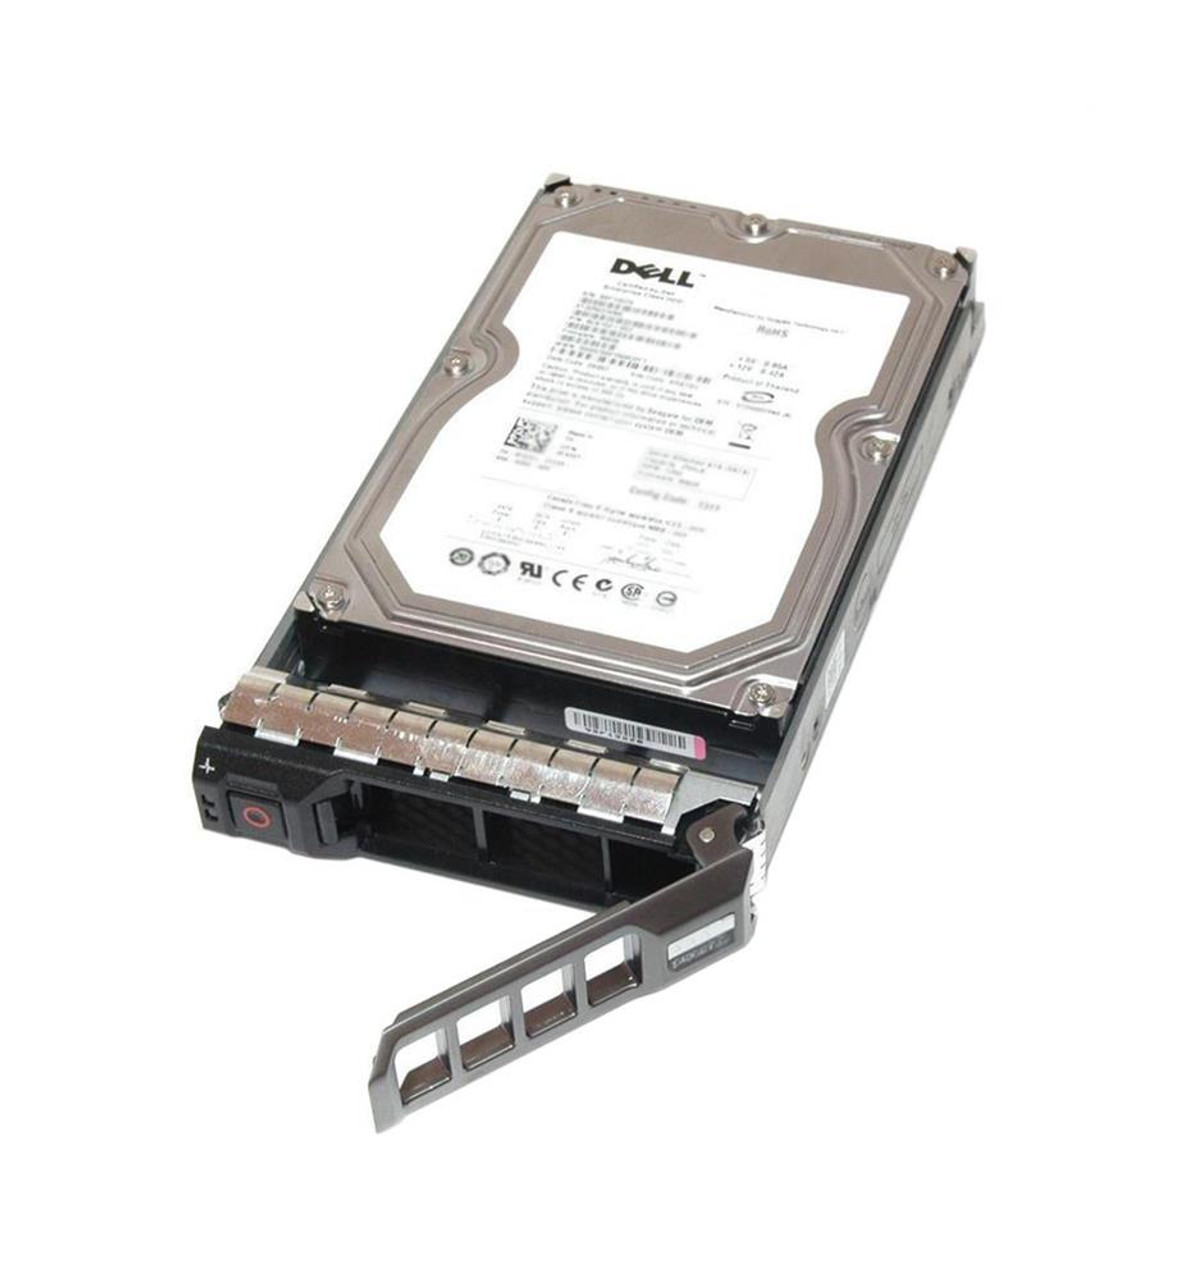 4WXPC Dell 4TB 7200RPM SATA 6Gbps 64MB Cache 3.5-inch Internal Hard Drive with Tray